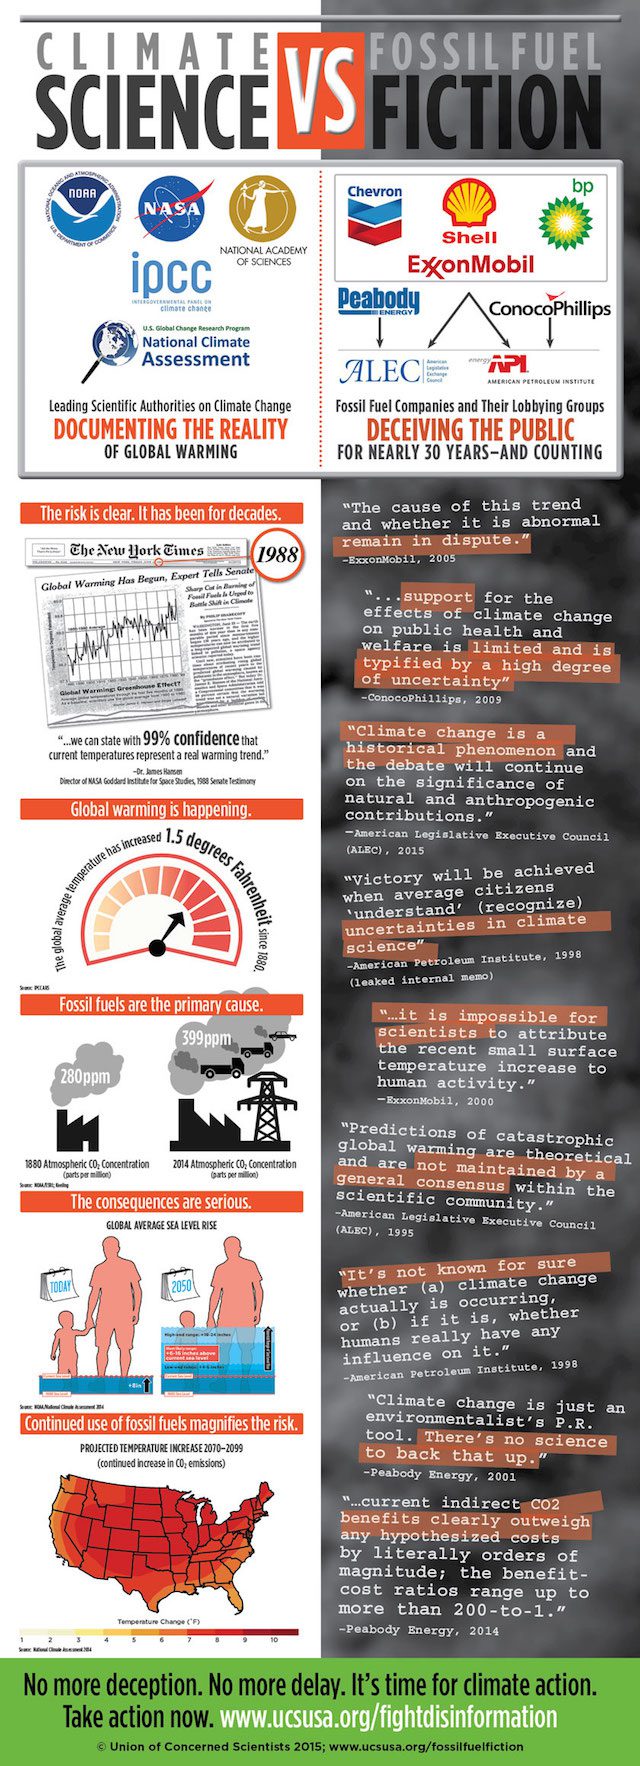 Infographic from the Union of Concerned Scientists shows climate science reality vs. fossil fuel fiction